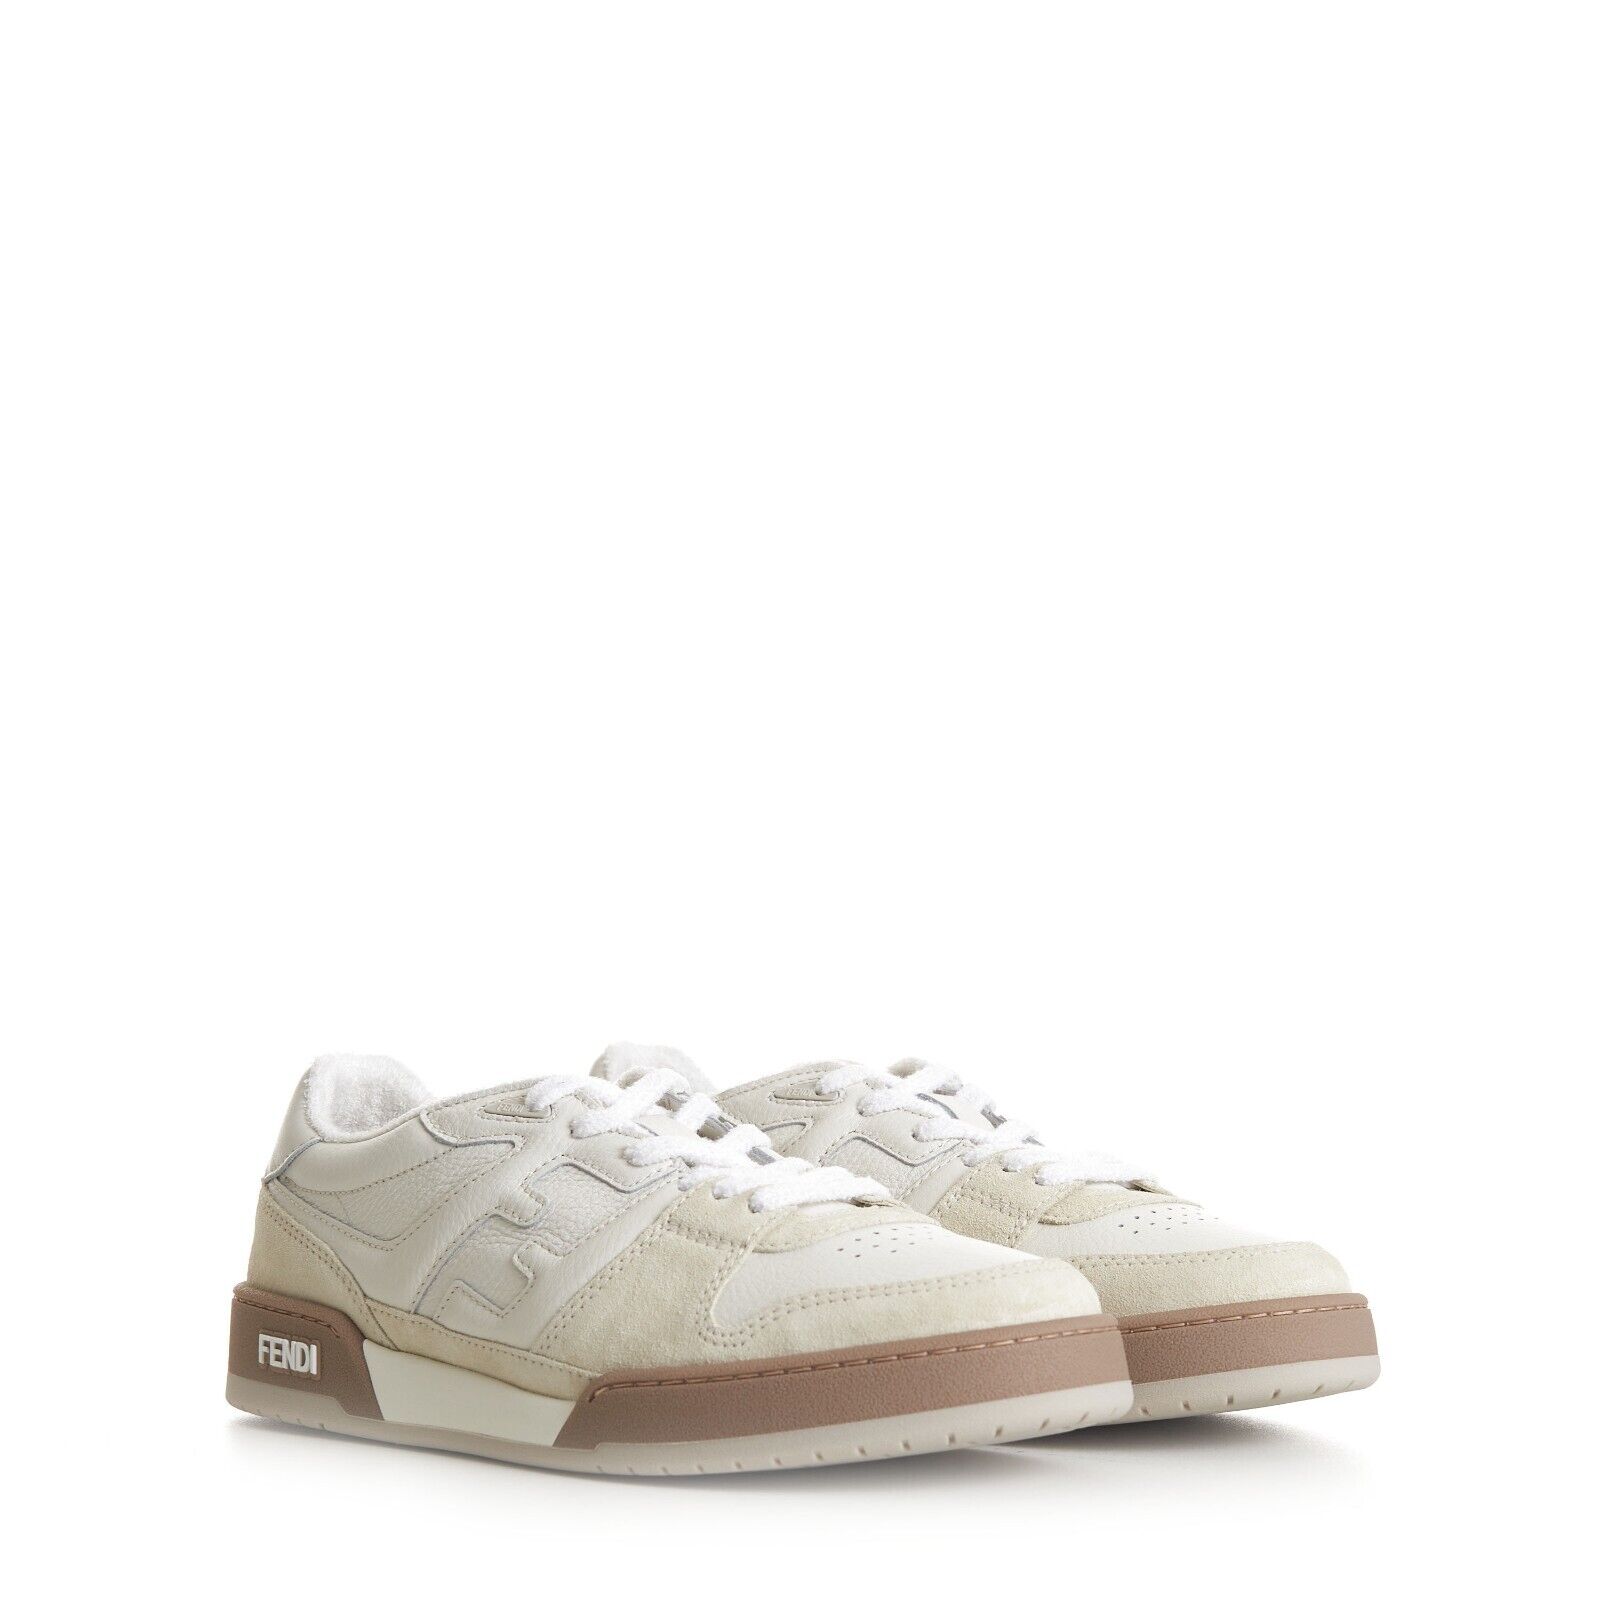 FENDI 930$ White \'Match\' Low Top Sneakers - Suede & Leather